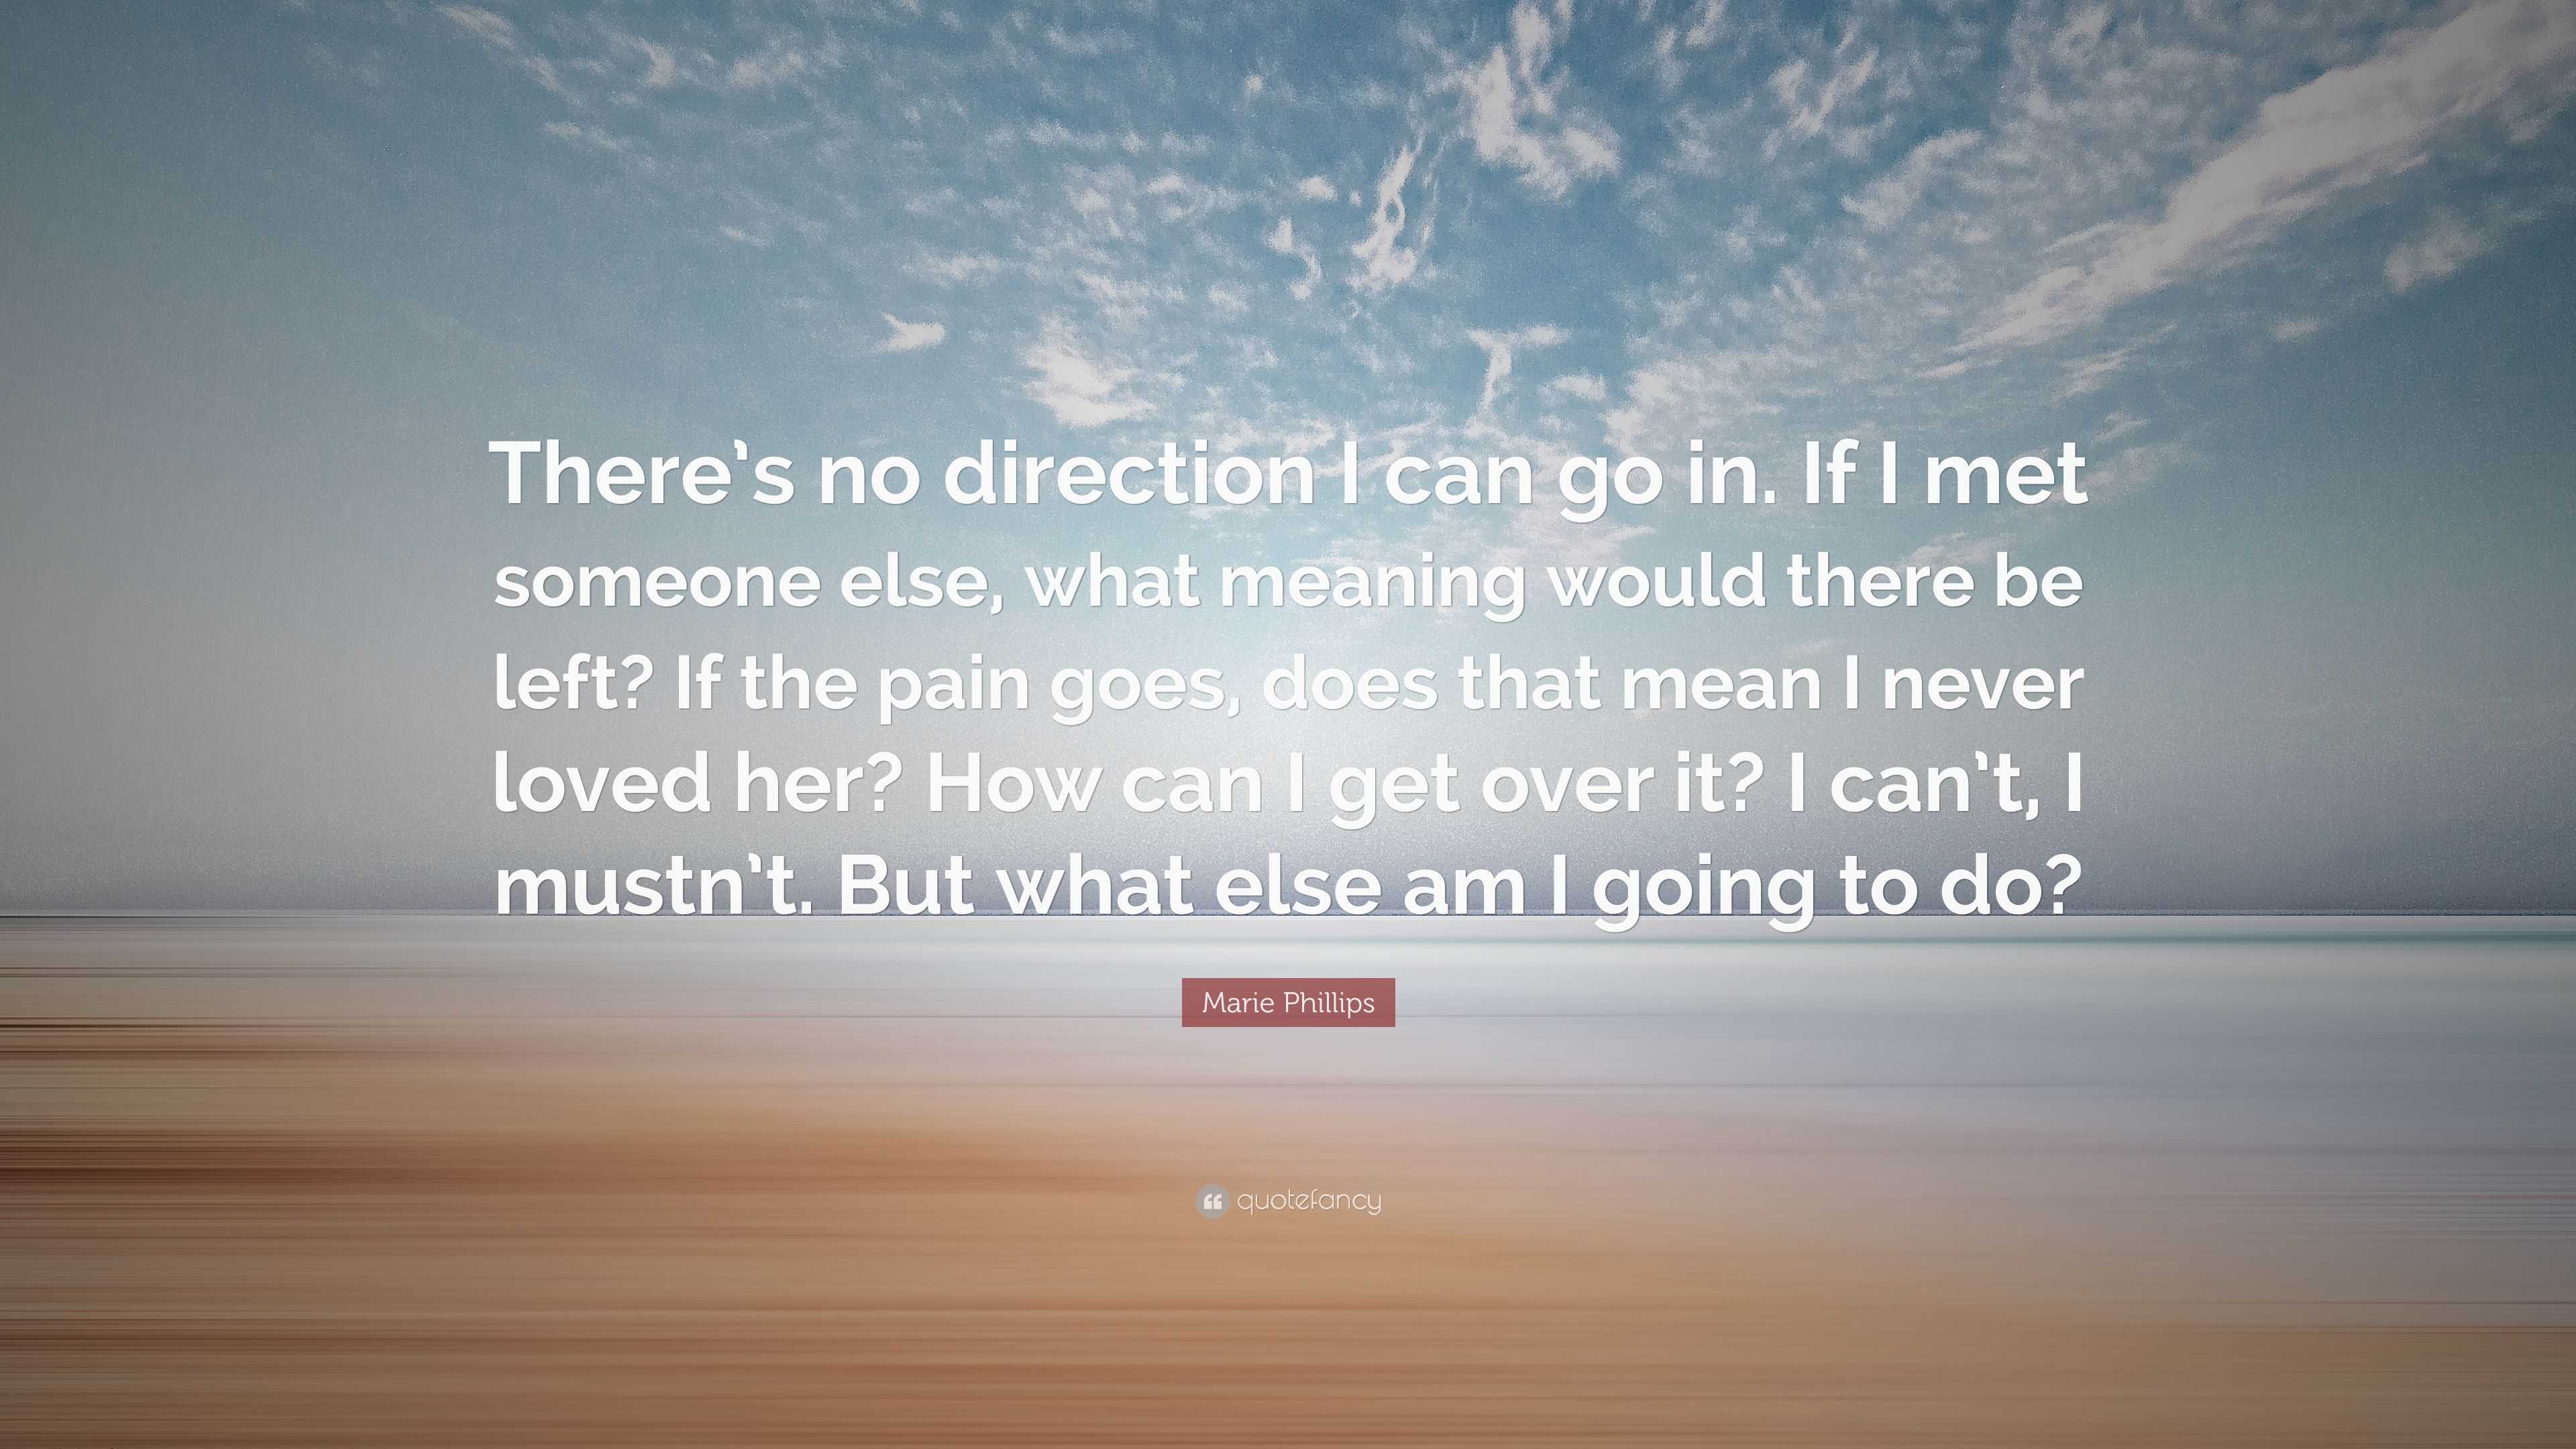 Marie Phillips Quote: “There's no direction I can go in. If I met someone  else, what meaning would there be left? If the pain goes, does that m”